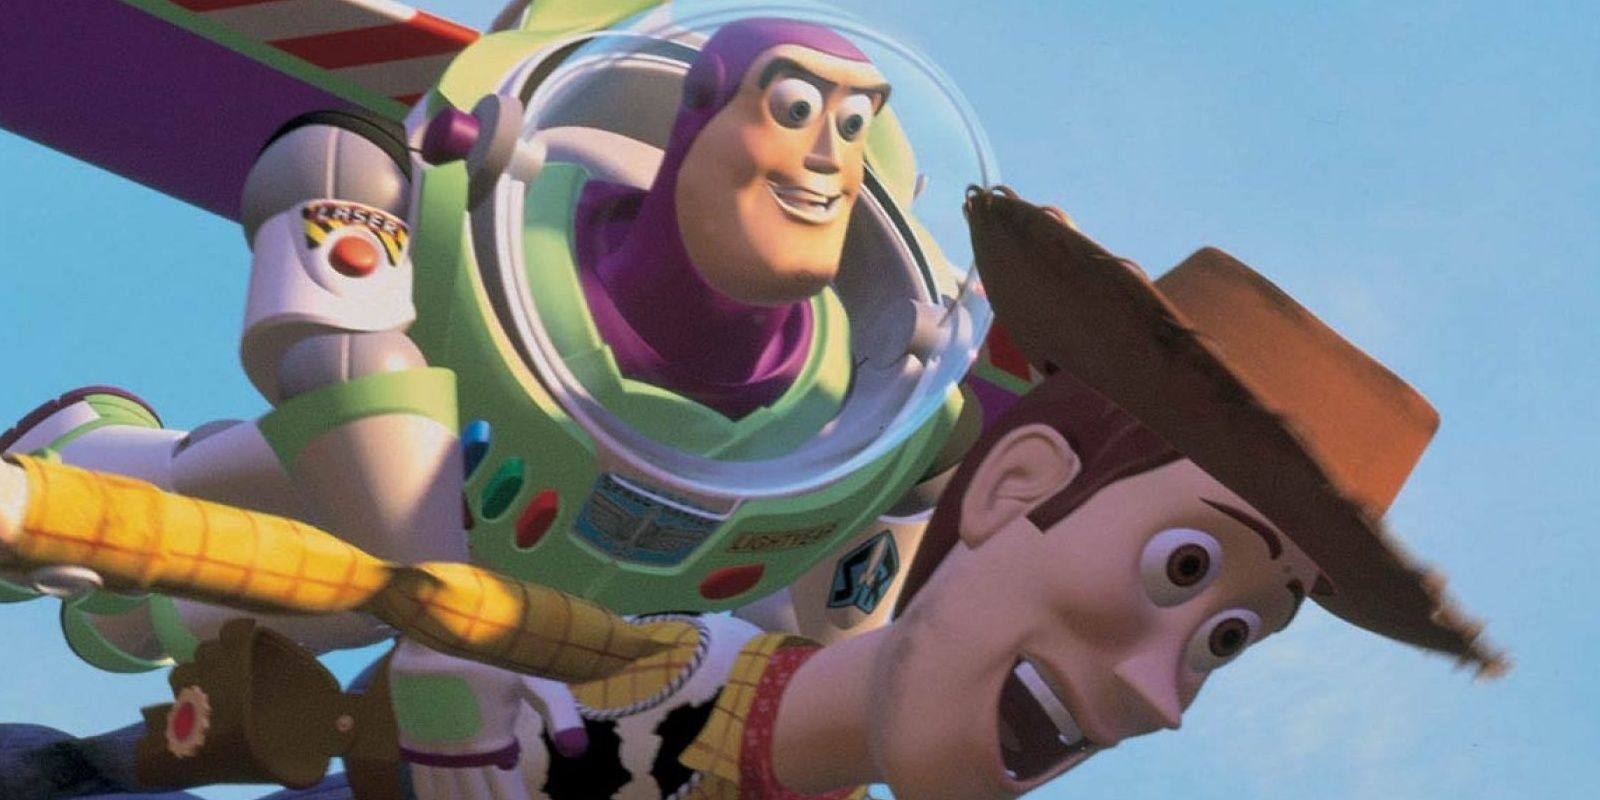 Buzz Lightyear and Woody falling with style in Toy Story